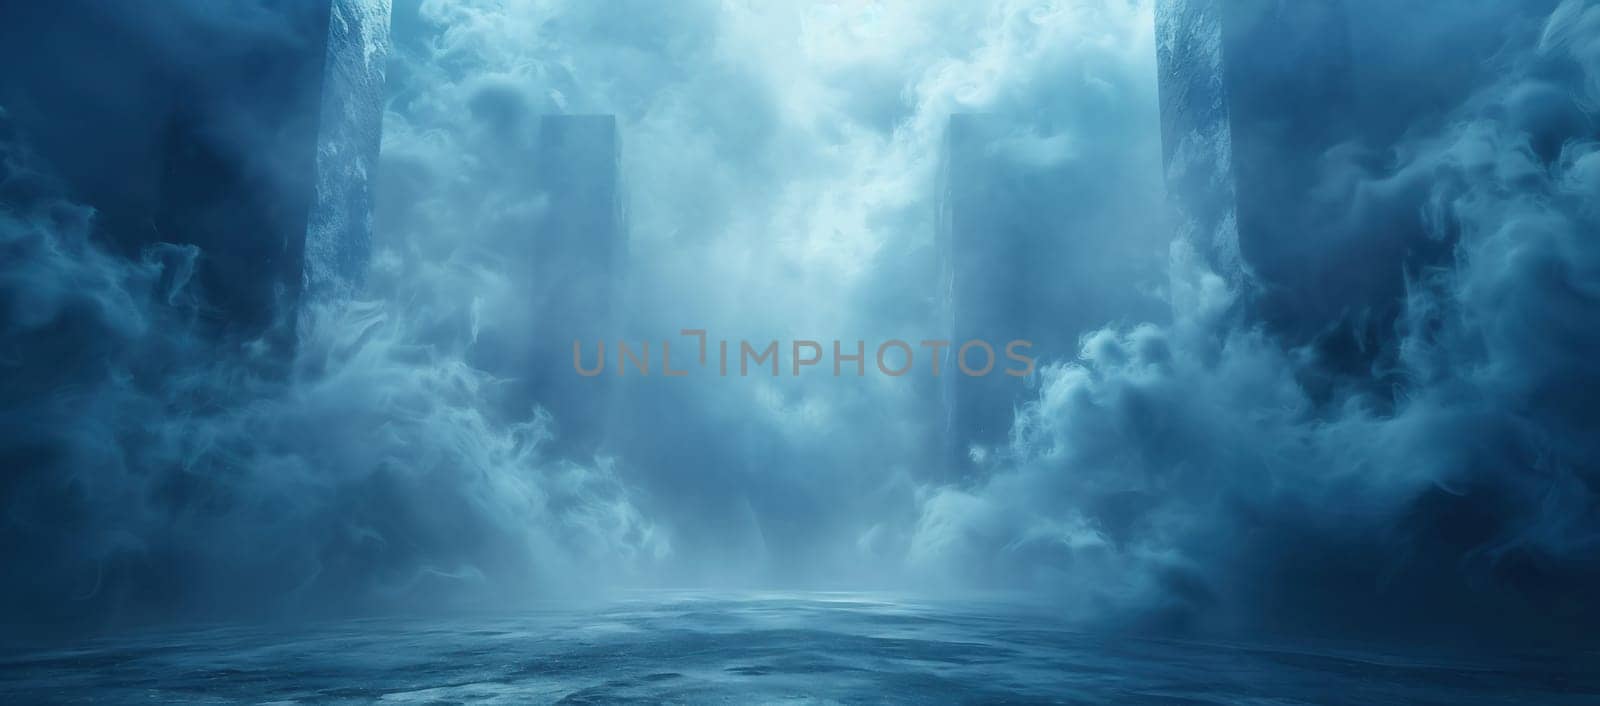 Epic sea background, storm in the sea. Digital illustration, digital painting. by Andelov13